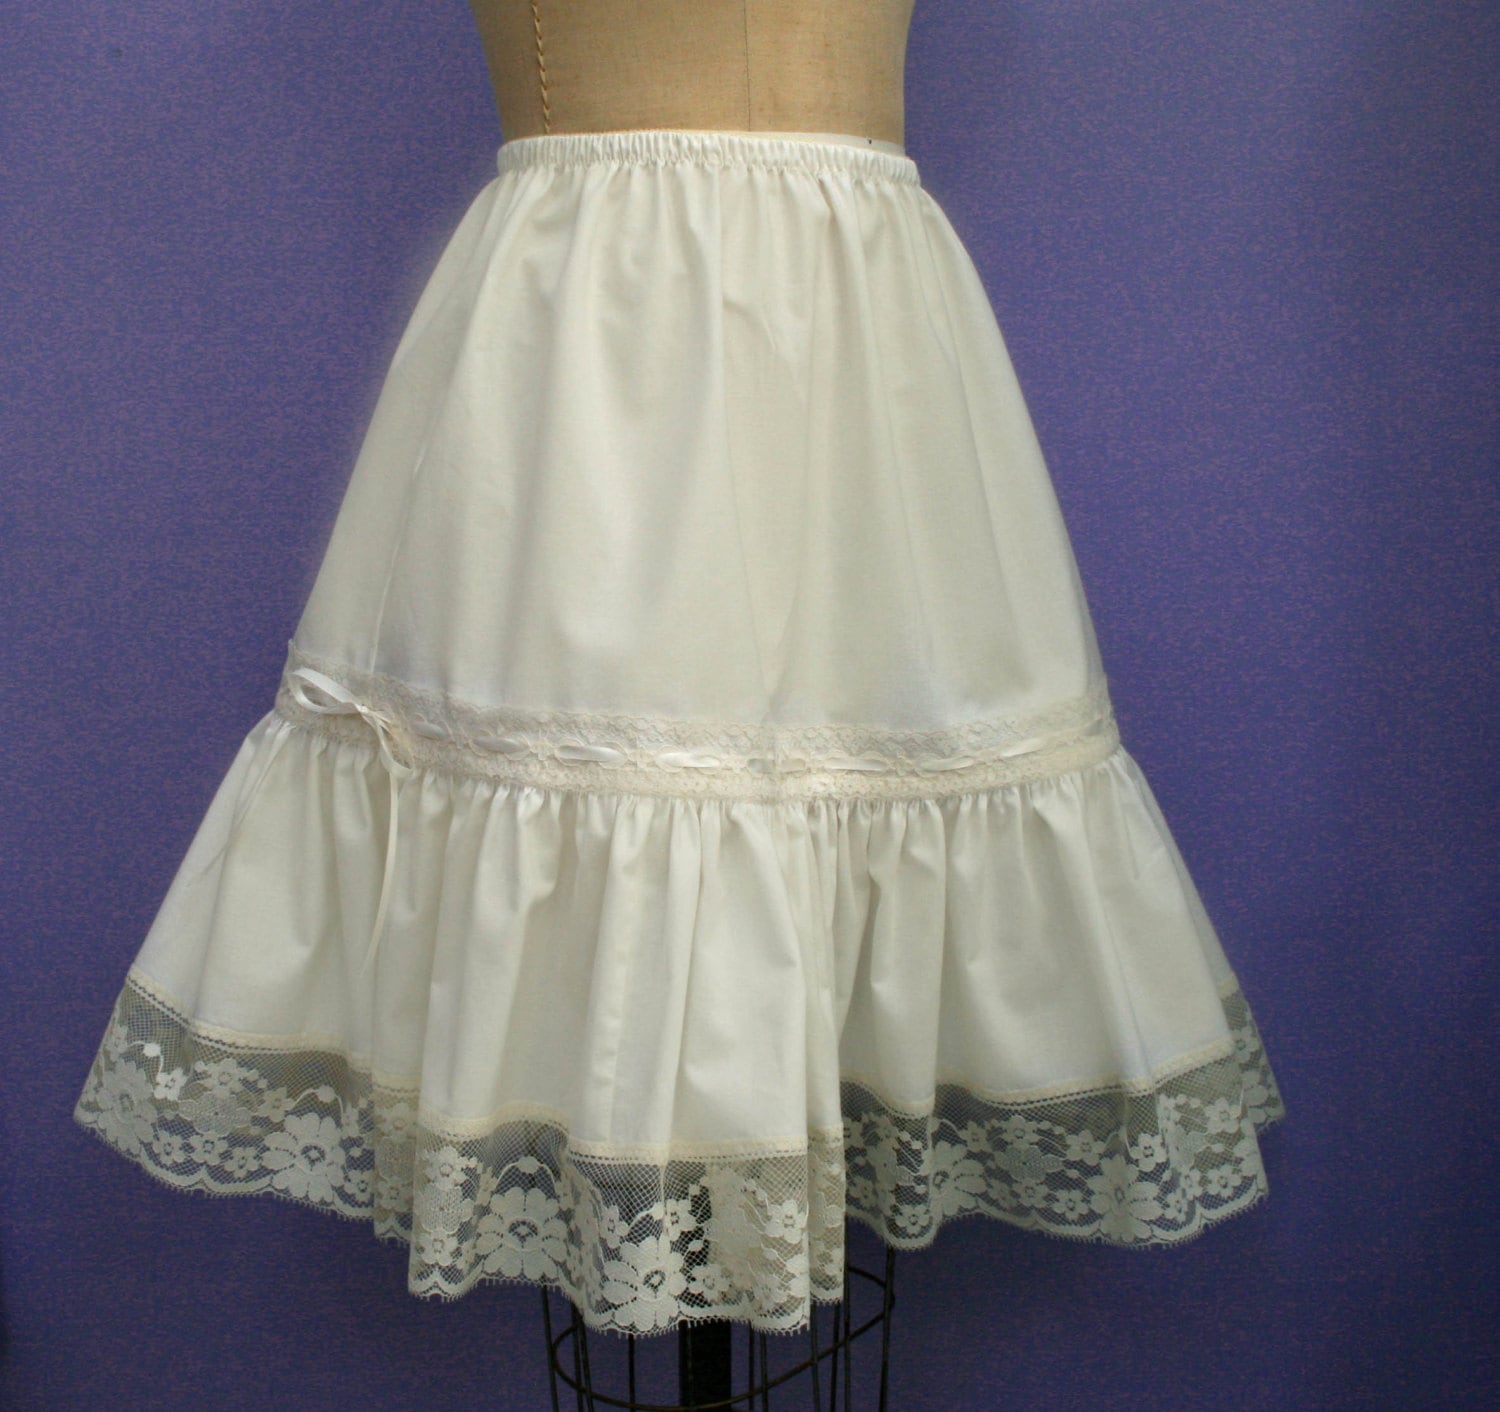 Plus size Vintage style Cotton Petticoat made in by 7PineDesign